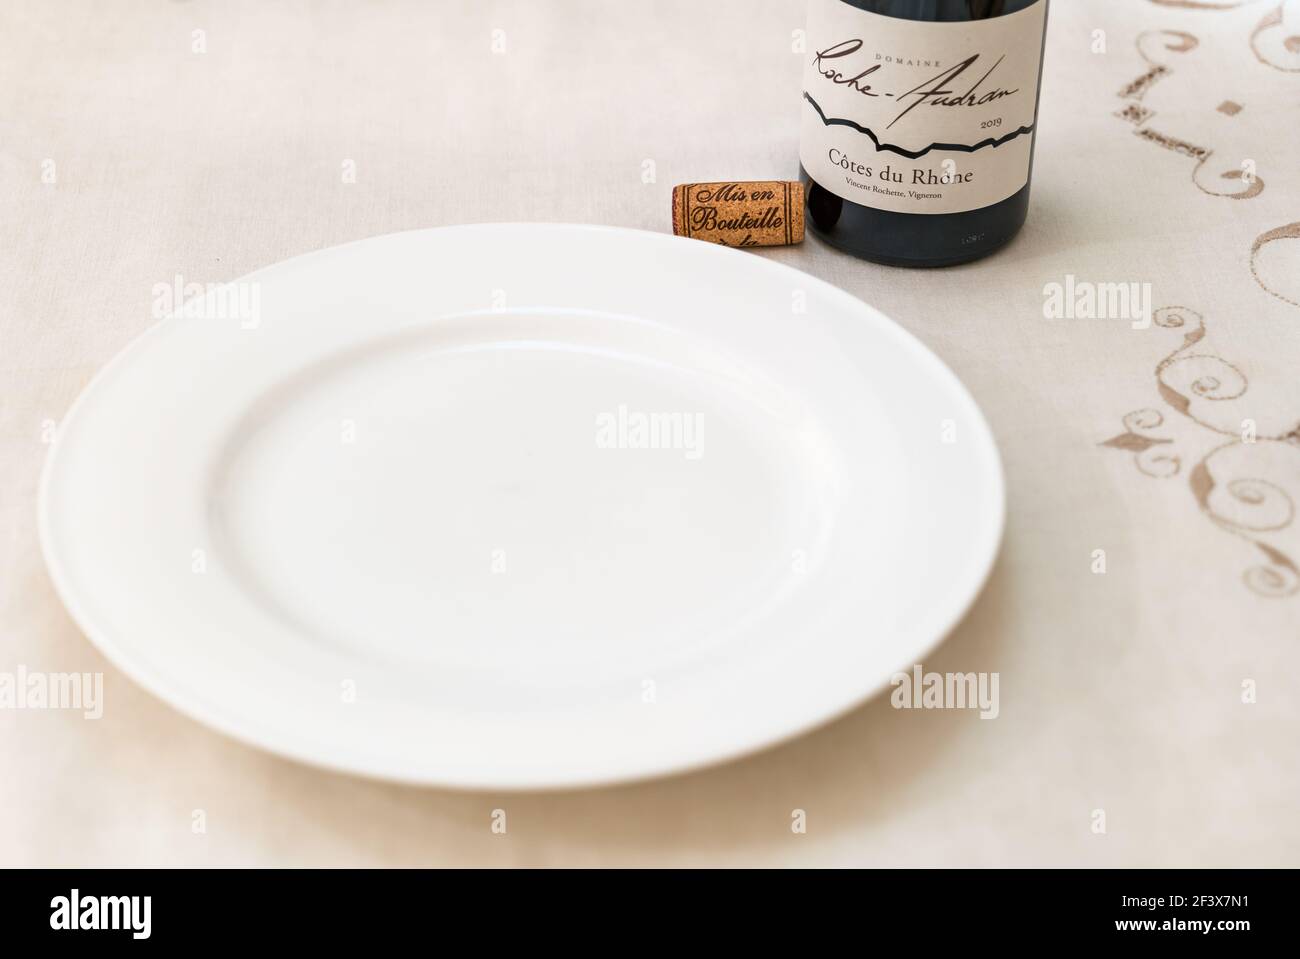 Plain white empty plate with bottle of Cote du Rhone Roche Audran French red wine and wine cork Stock Photo